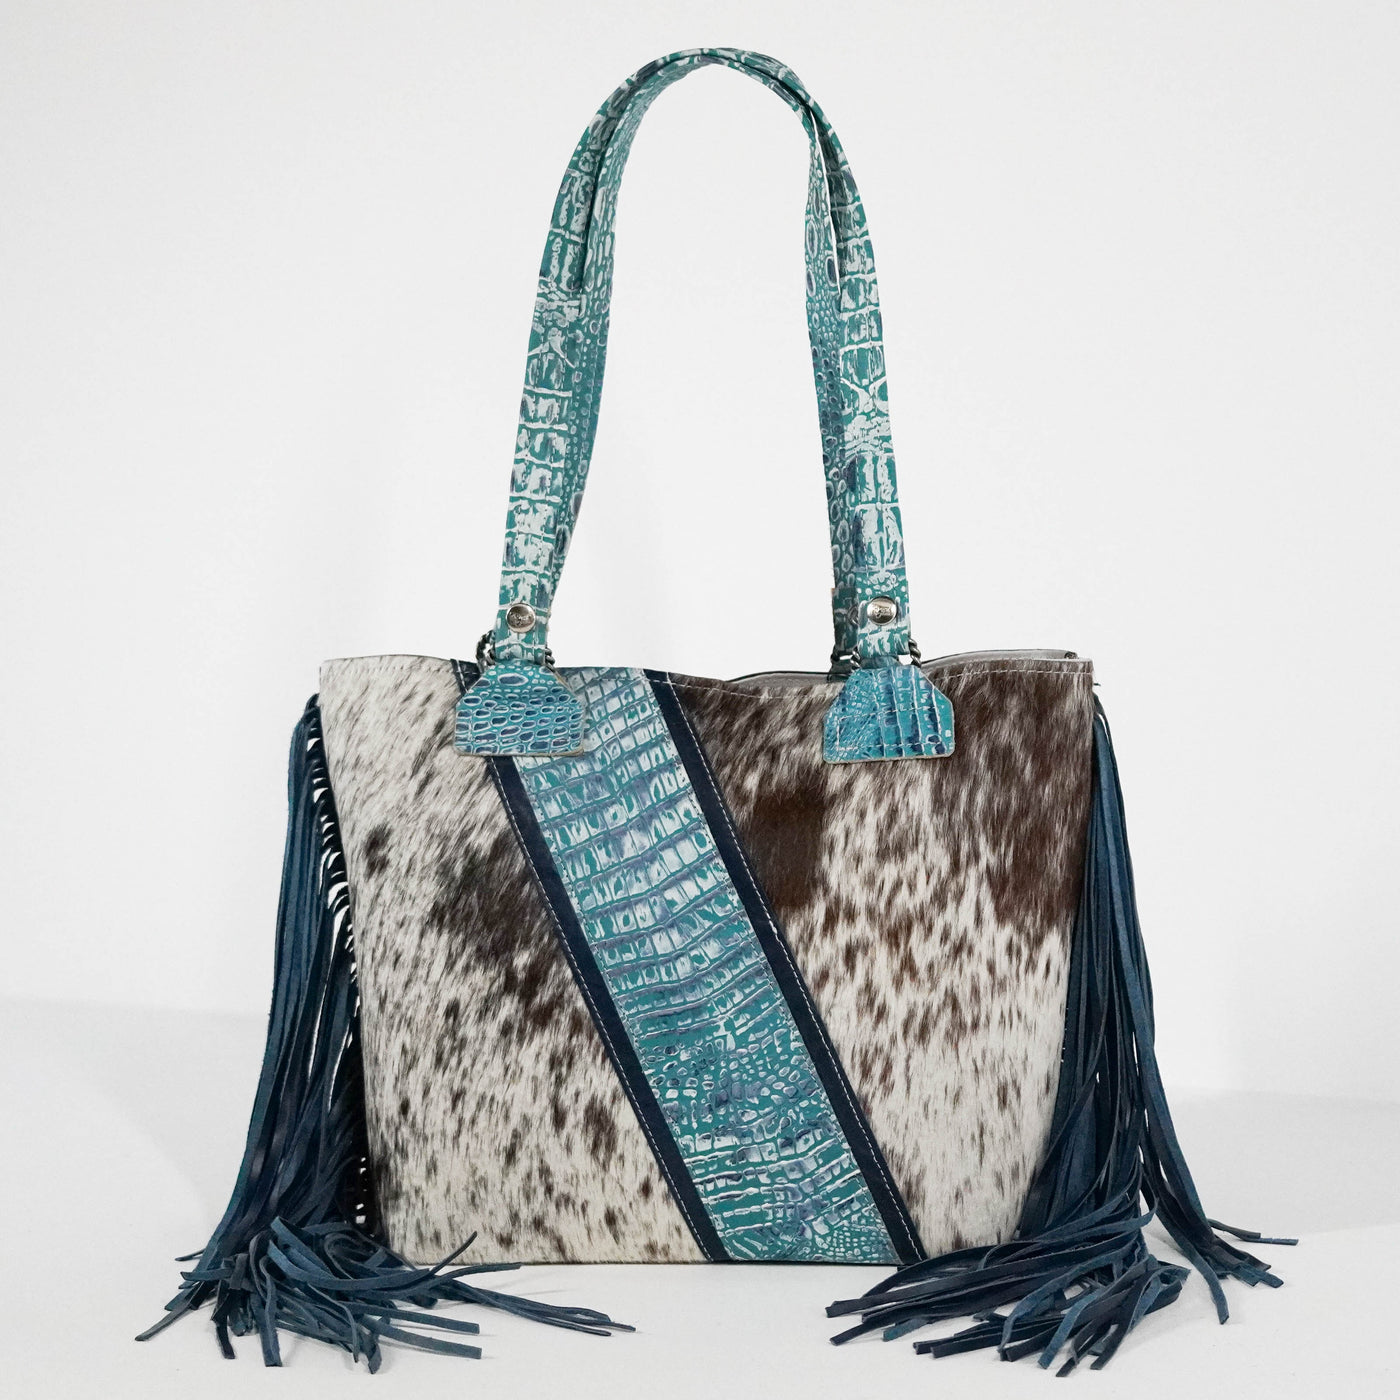 Taylor - Chocolate & White w/ Glacier Park Croc-Taylor-Western-Cowhide-Bags-Handmade-Products-Gifts-Dancing Cactus Designs